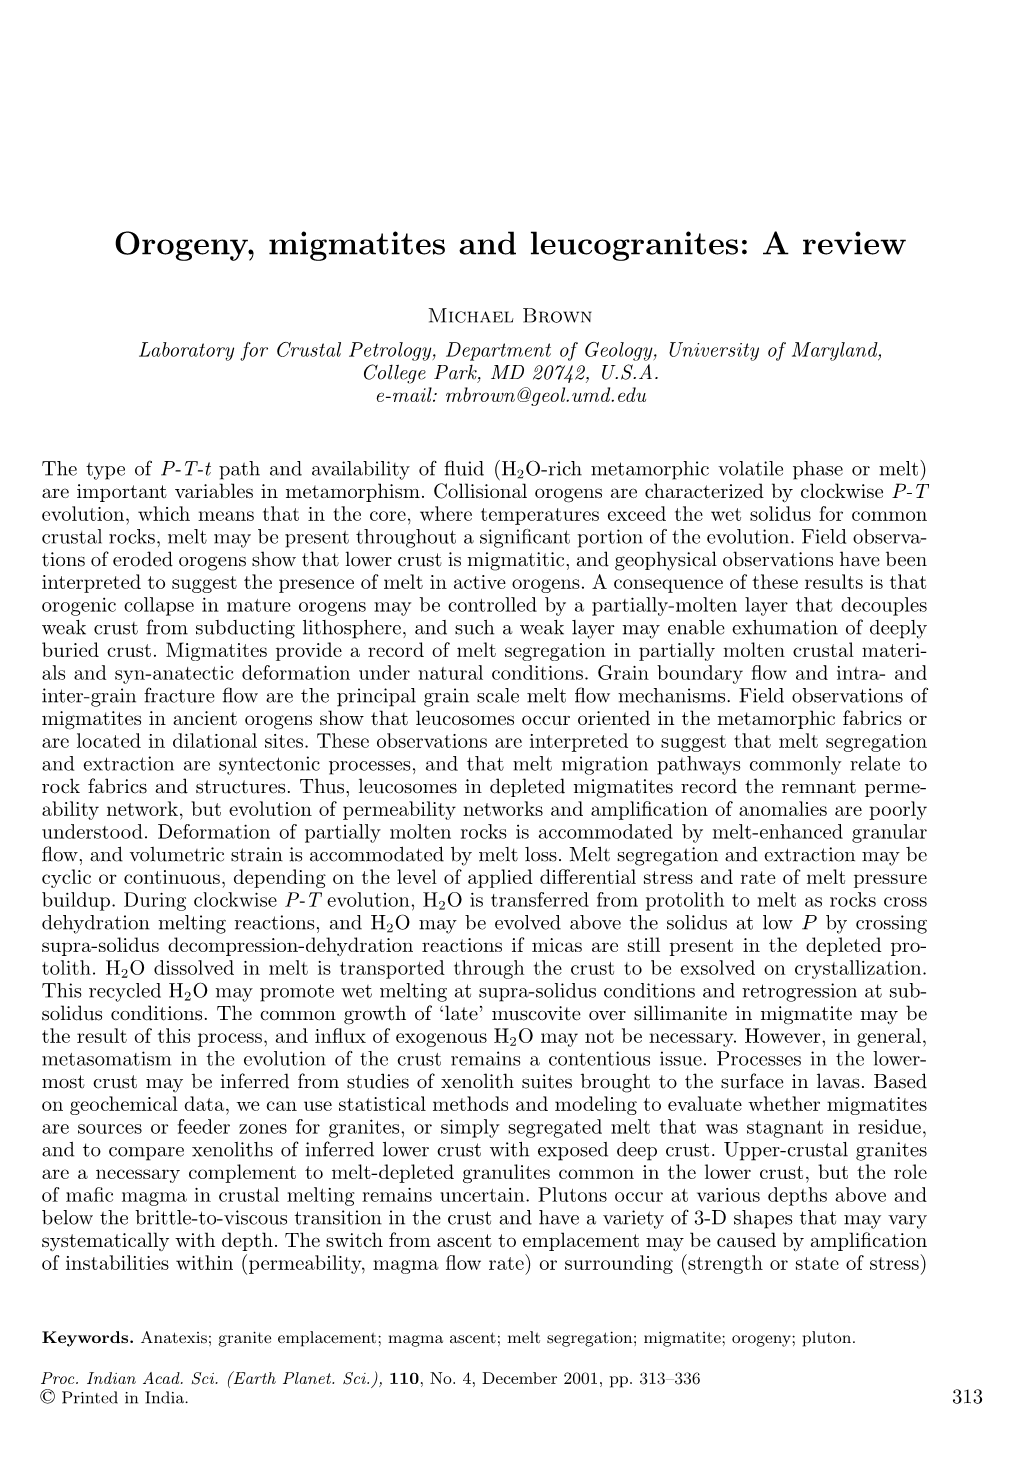 Orogeny, Migmatites and Leucogranites: a Review